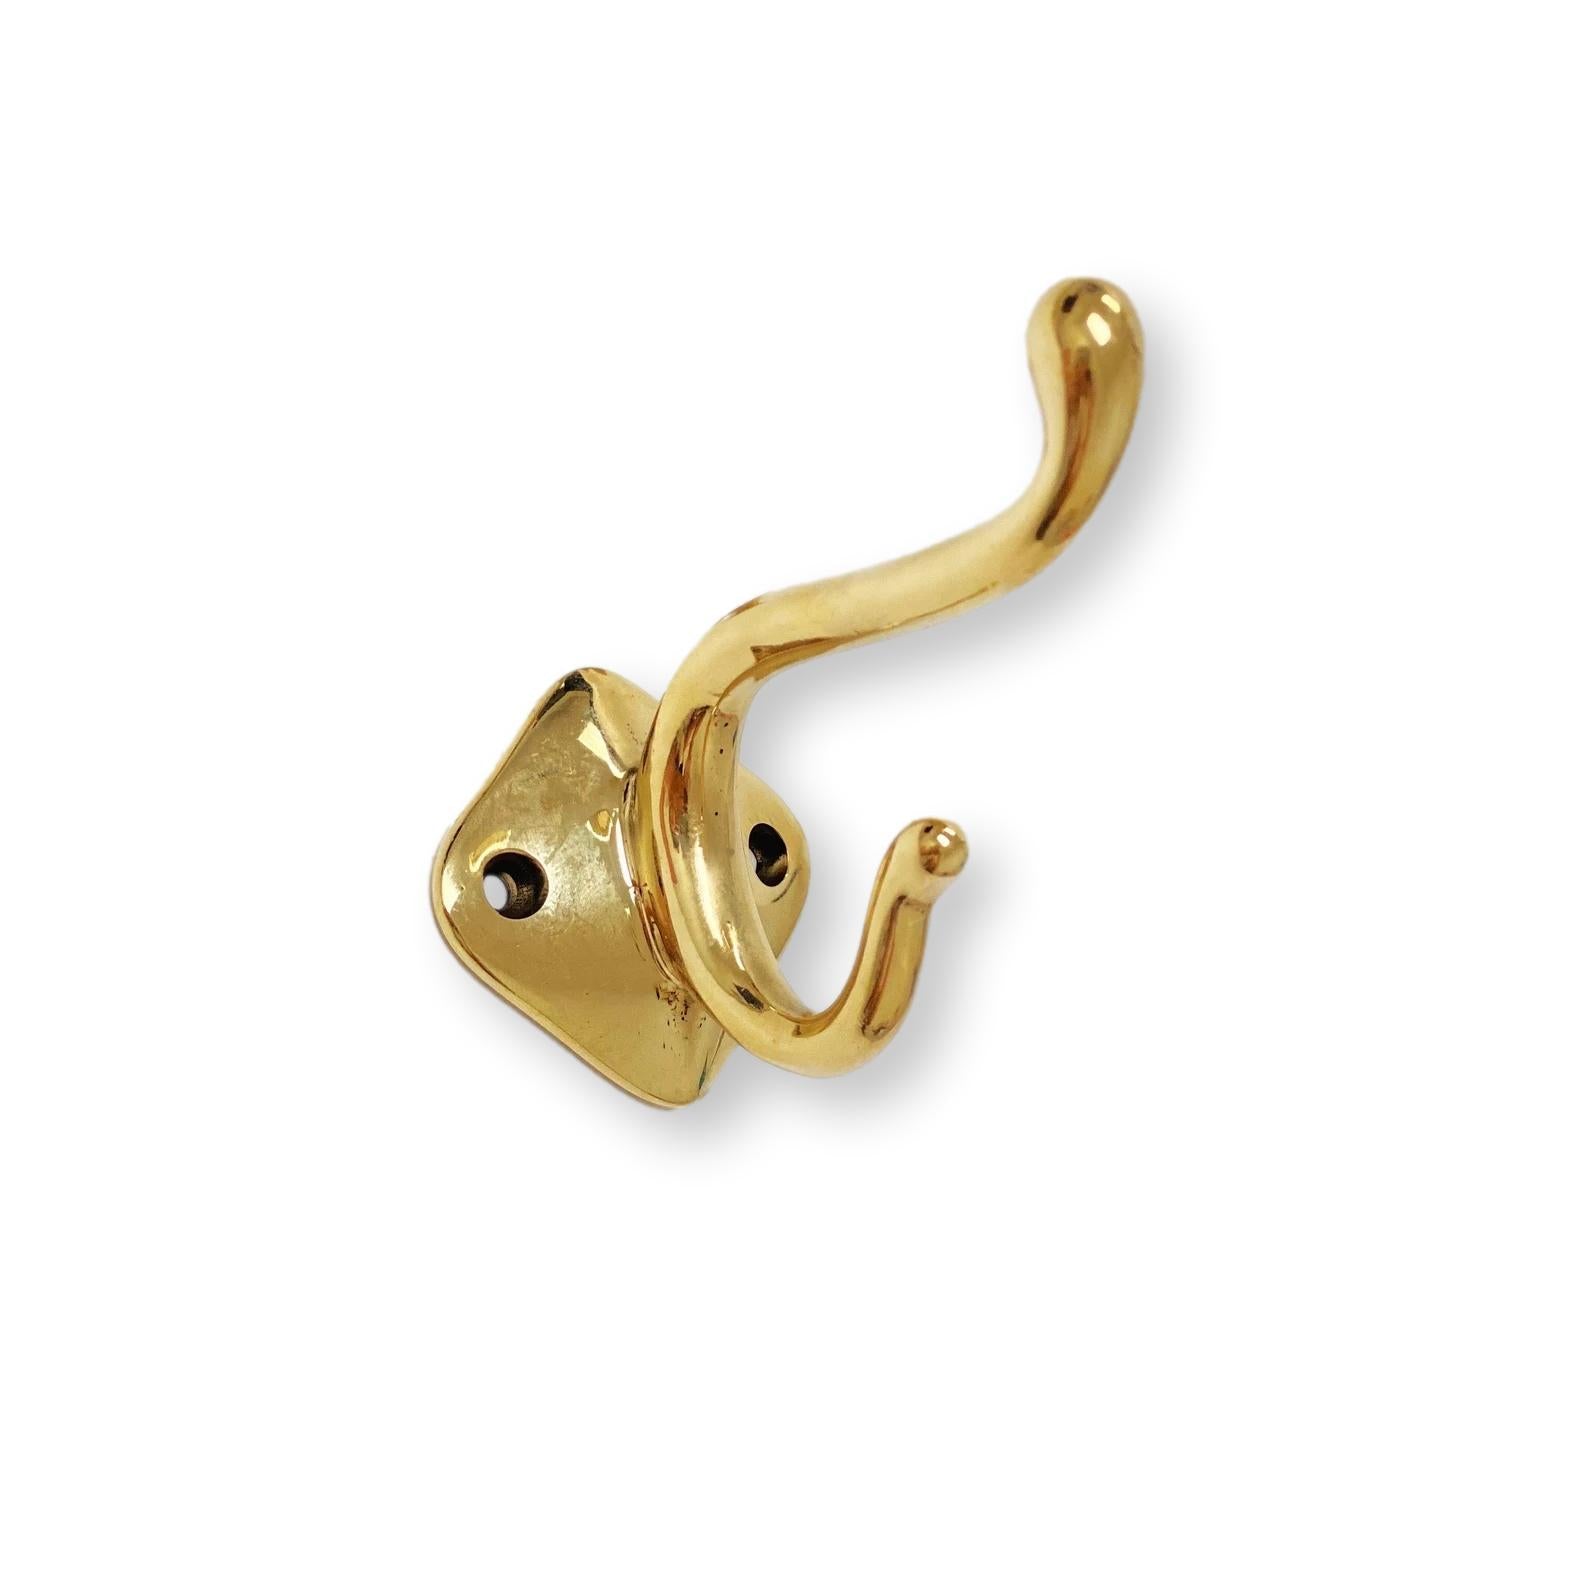 Unlacquered Brass Louie Style 4 Polished Brass Wall Coat and Hat Hook